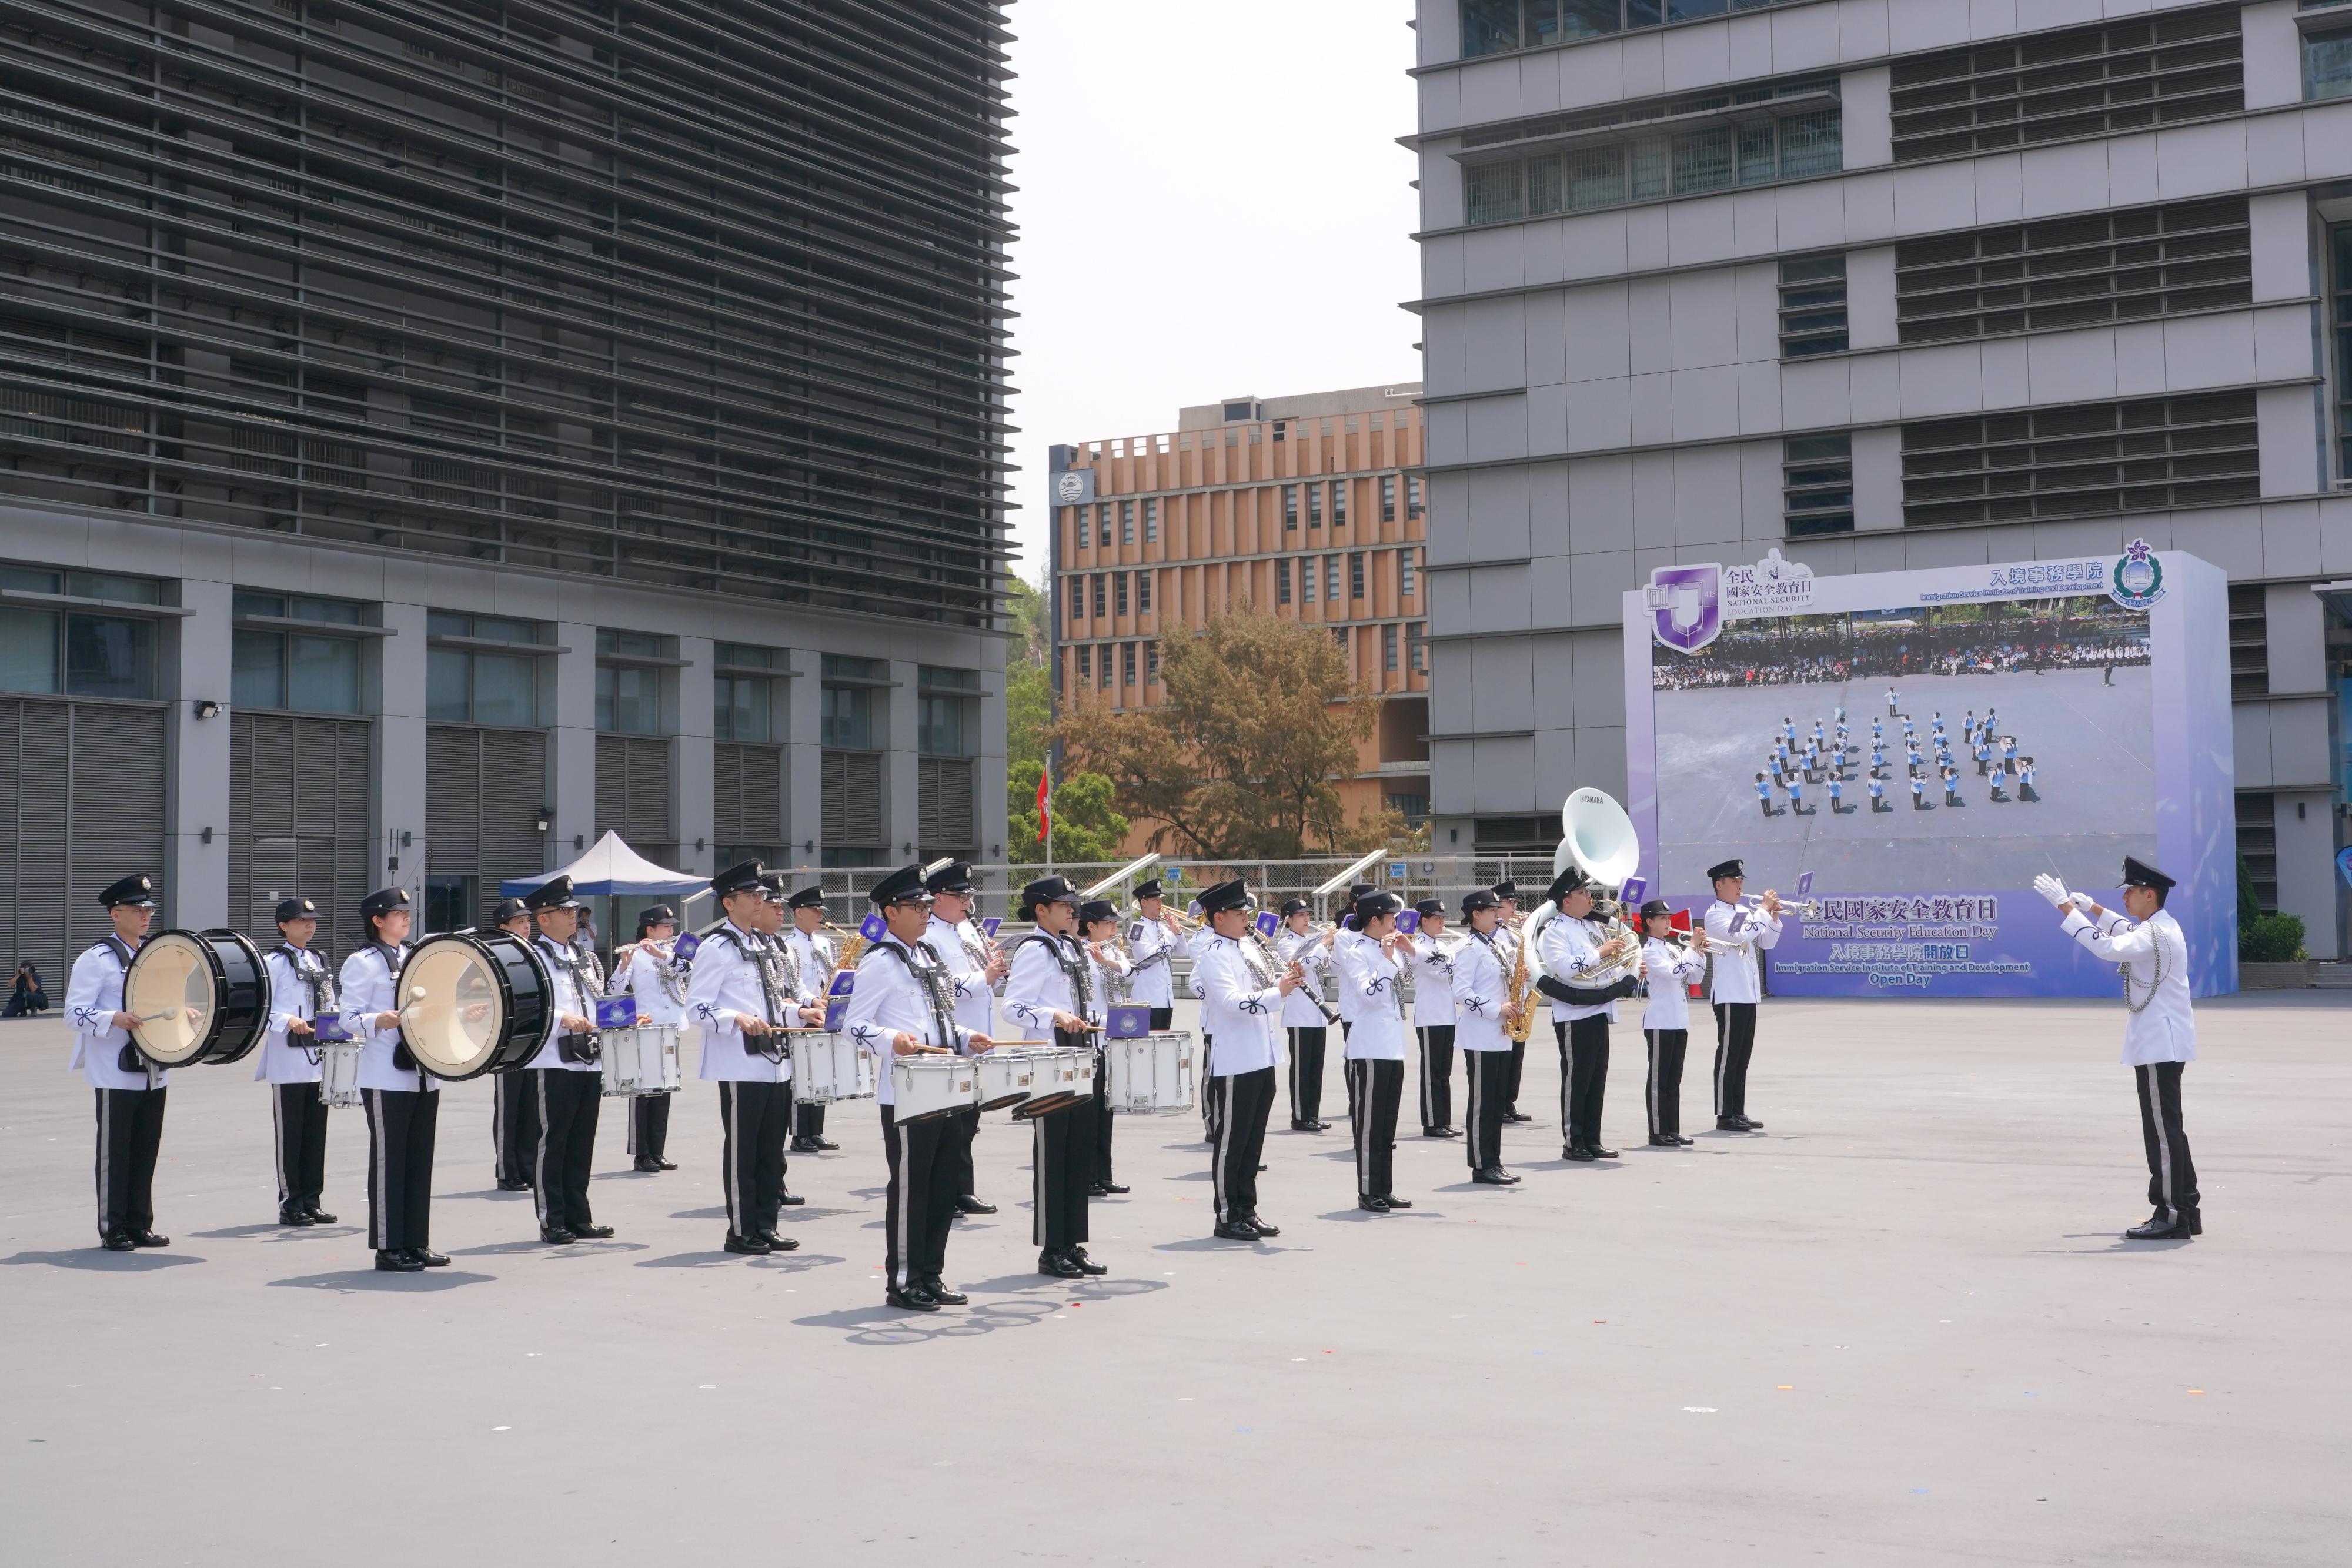 The Immigration Band gave a performance during the open day of the Immigration Service Institute of Training and Development for supporting the National Security Education Day today (April 13).